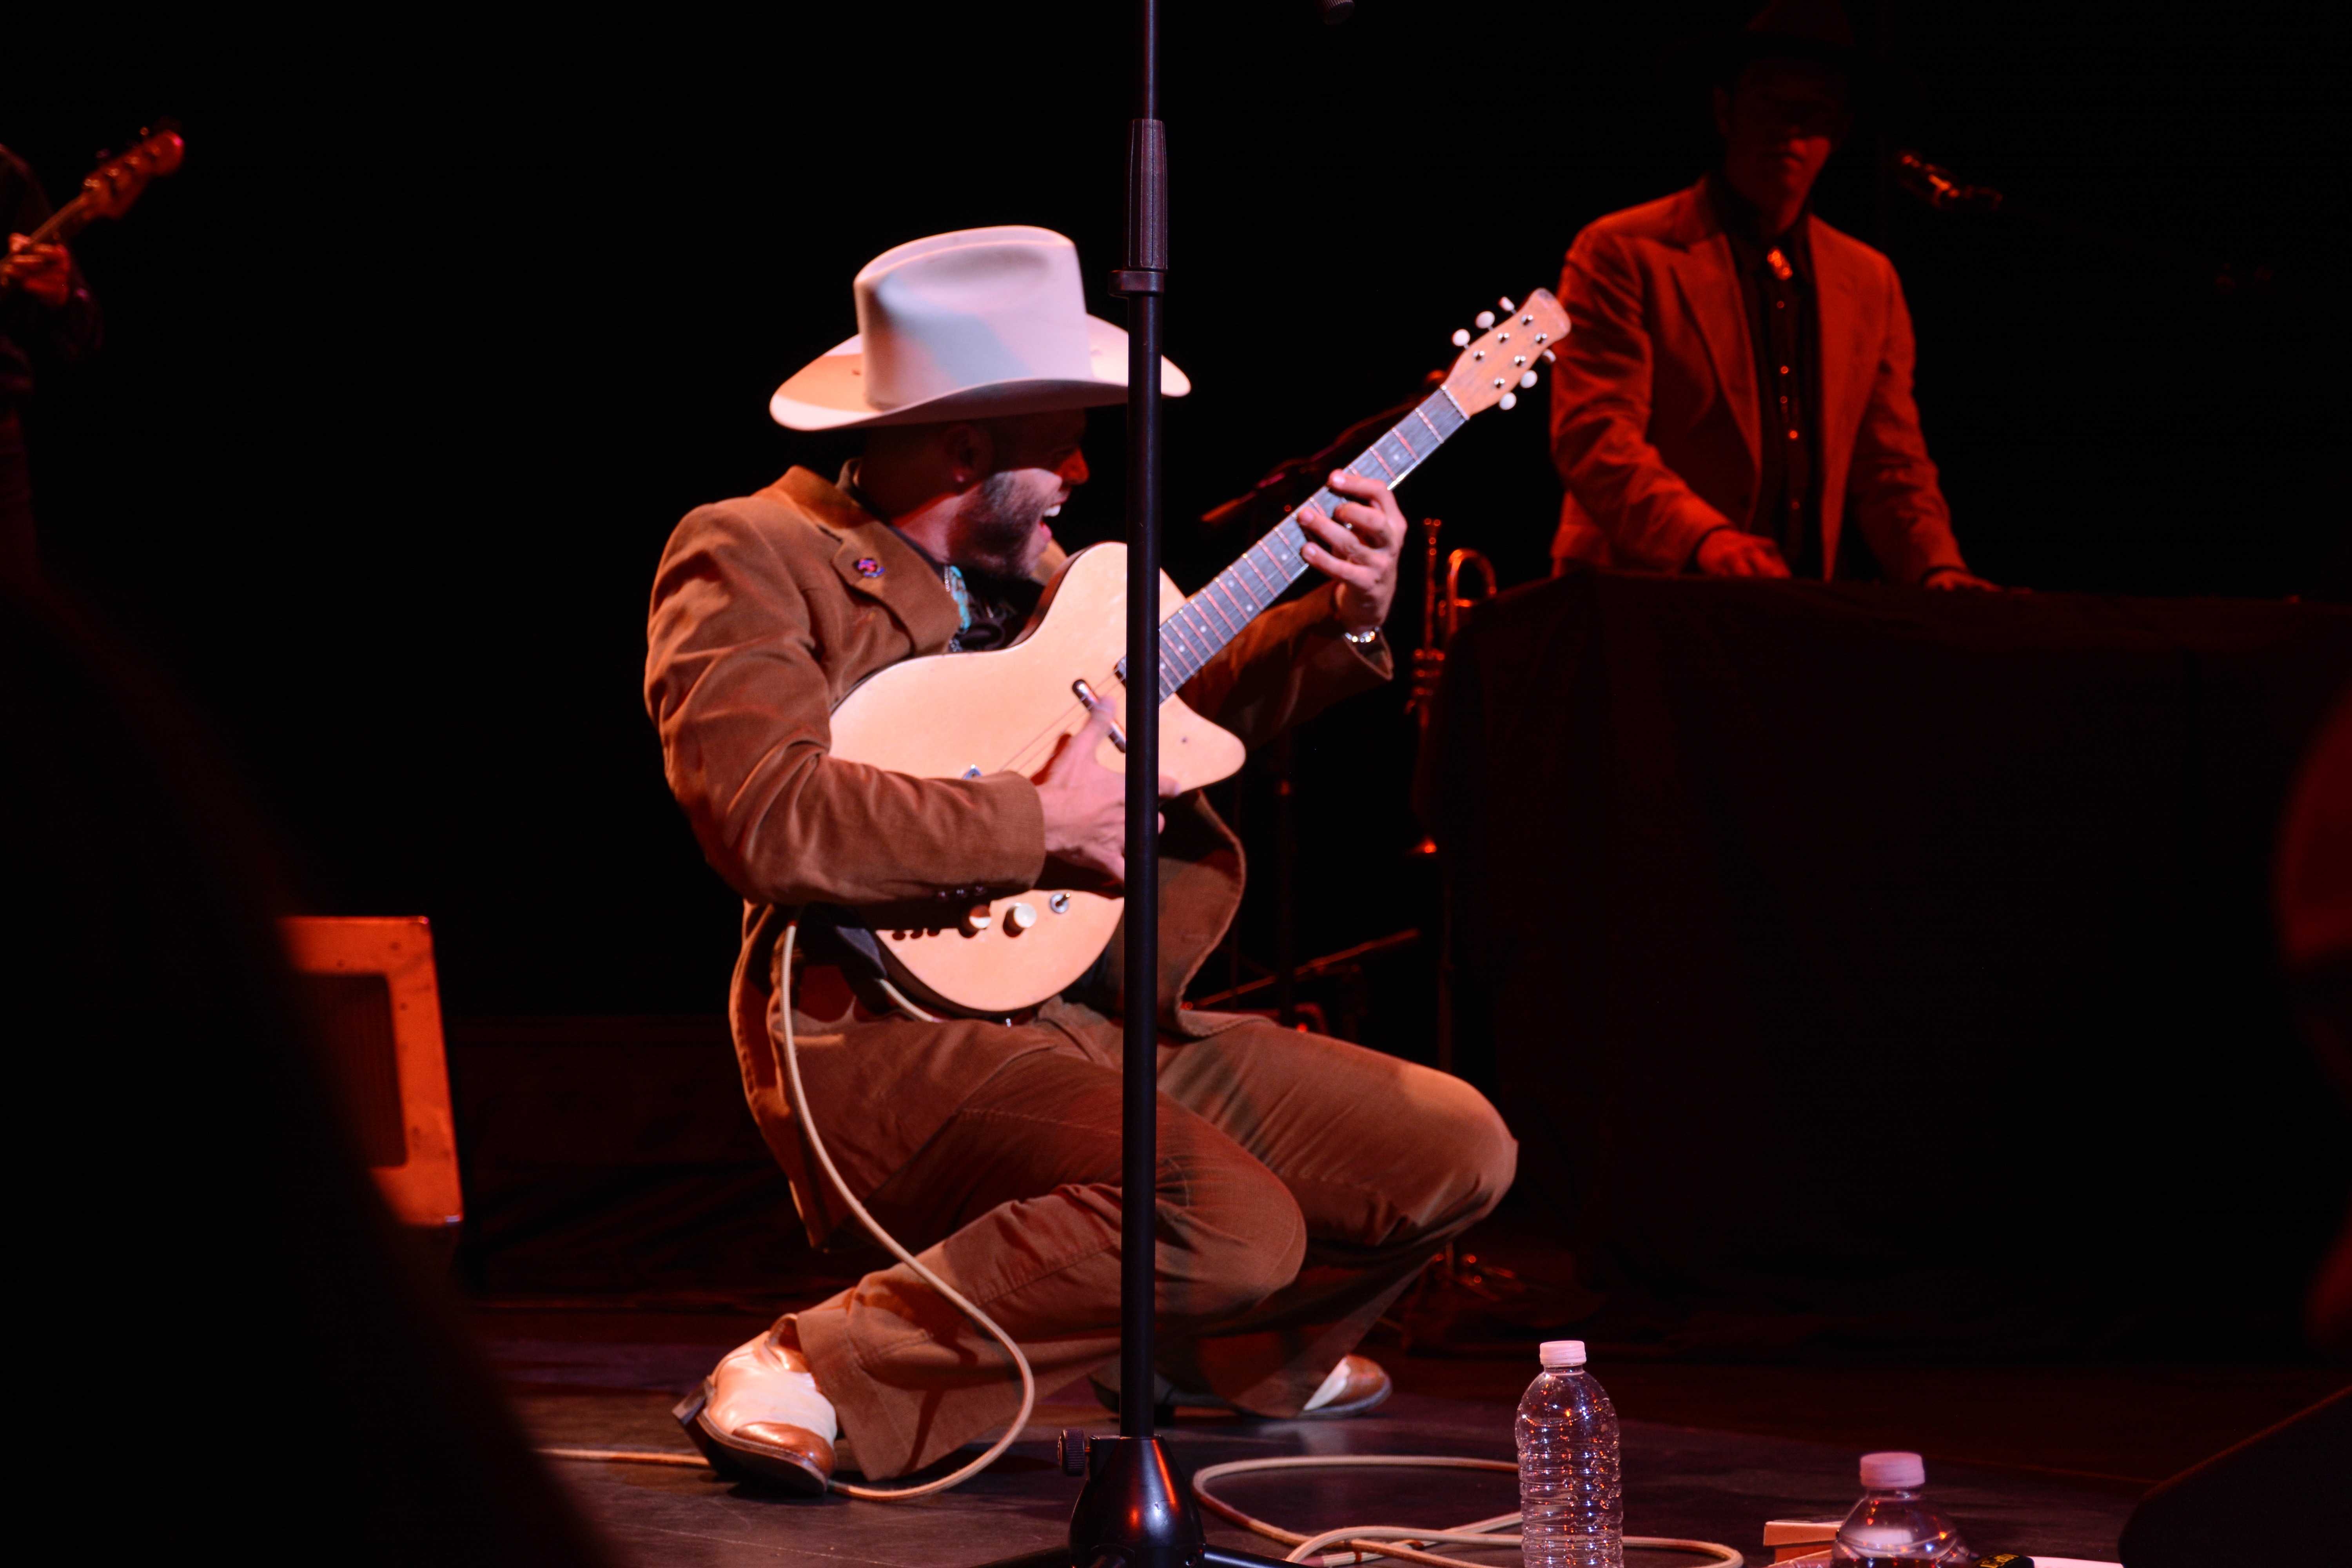 Photo by Jacob Vaughn | Charley Crockett, a local blues artist, plays at the Majestic Theatre. Photographers are not free to shoot whenever they want during all of his shows.